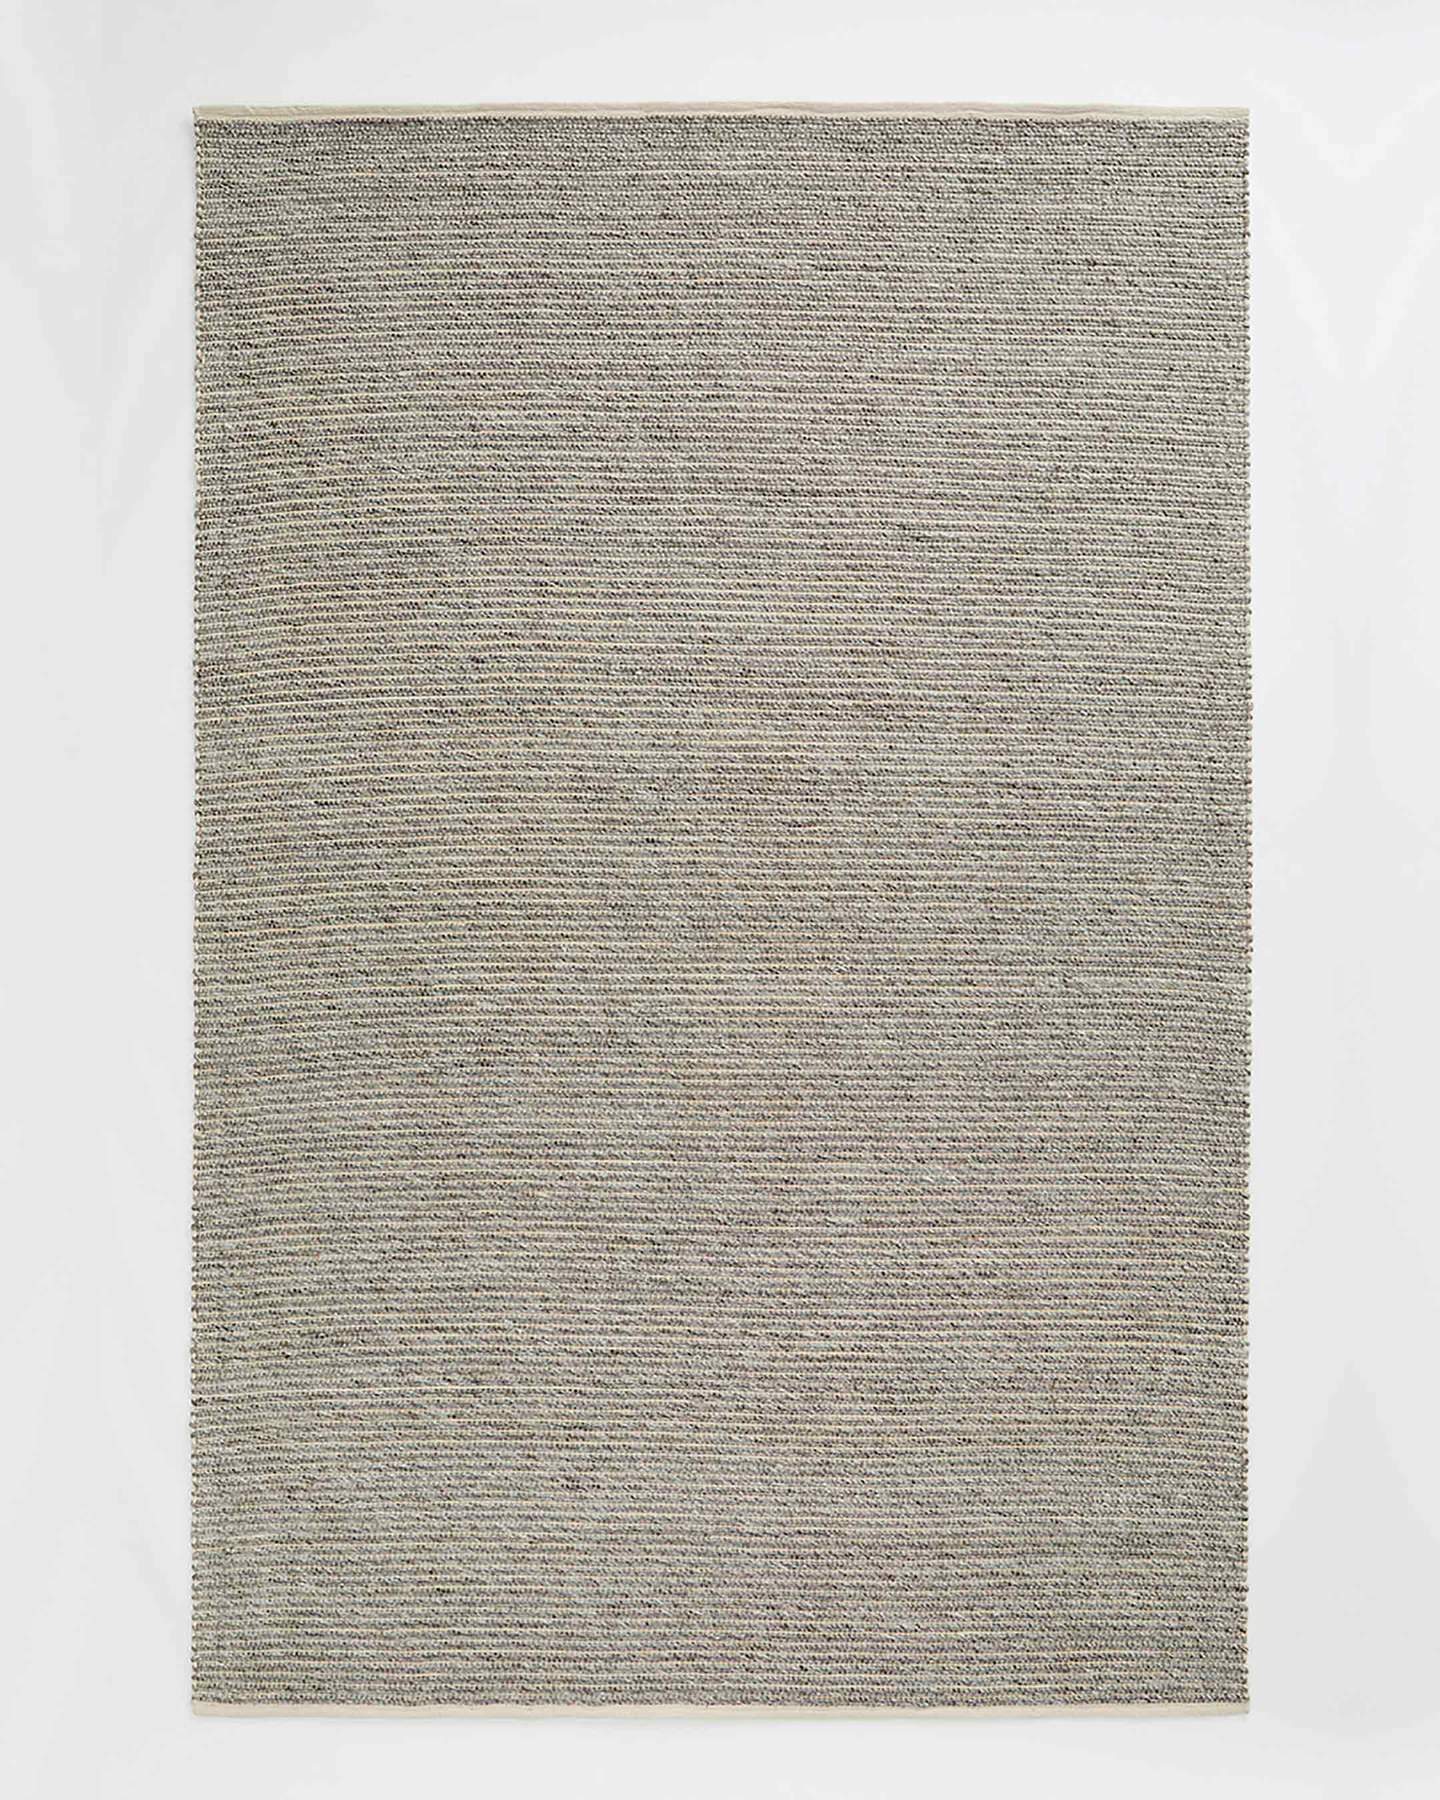 Andes Floor Rug - Feather - 200cm x 300cm